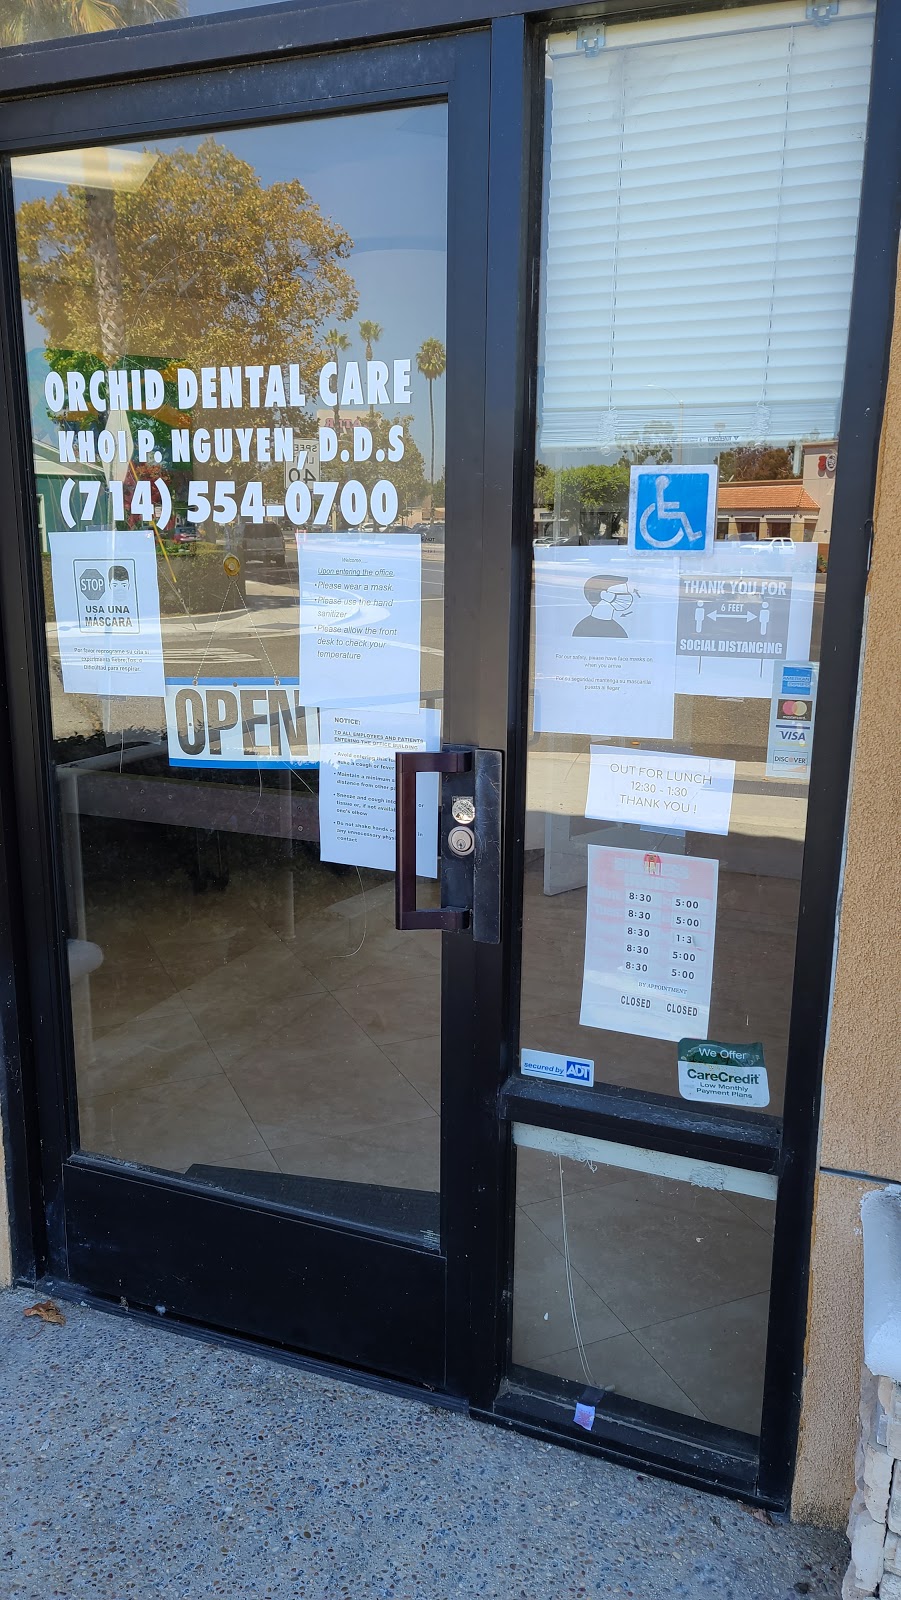 Orchid Dental Care | 2708 Westminster Ave #100, Santa Ana, CA 92706 | Phone: (714) 554-0700